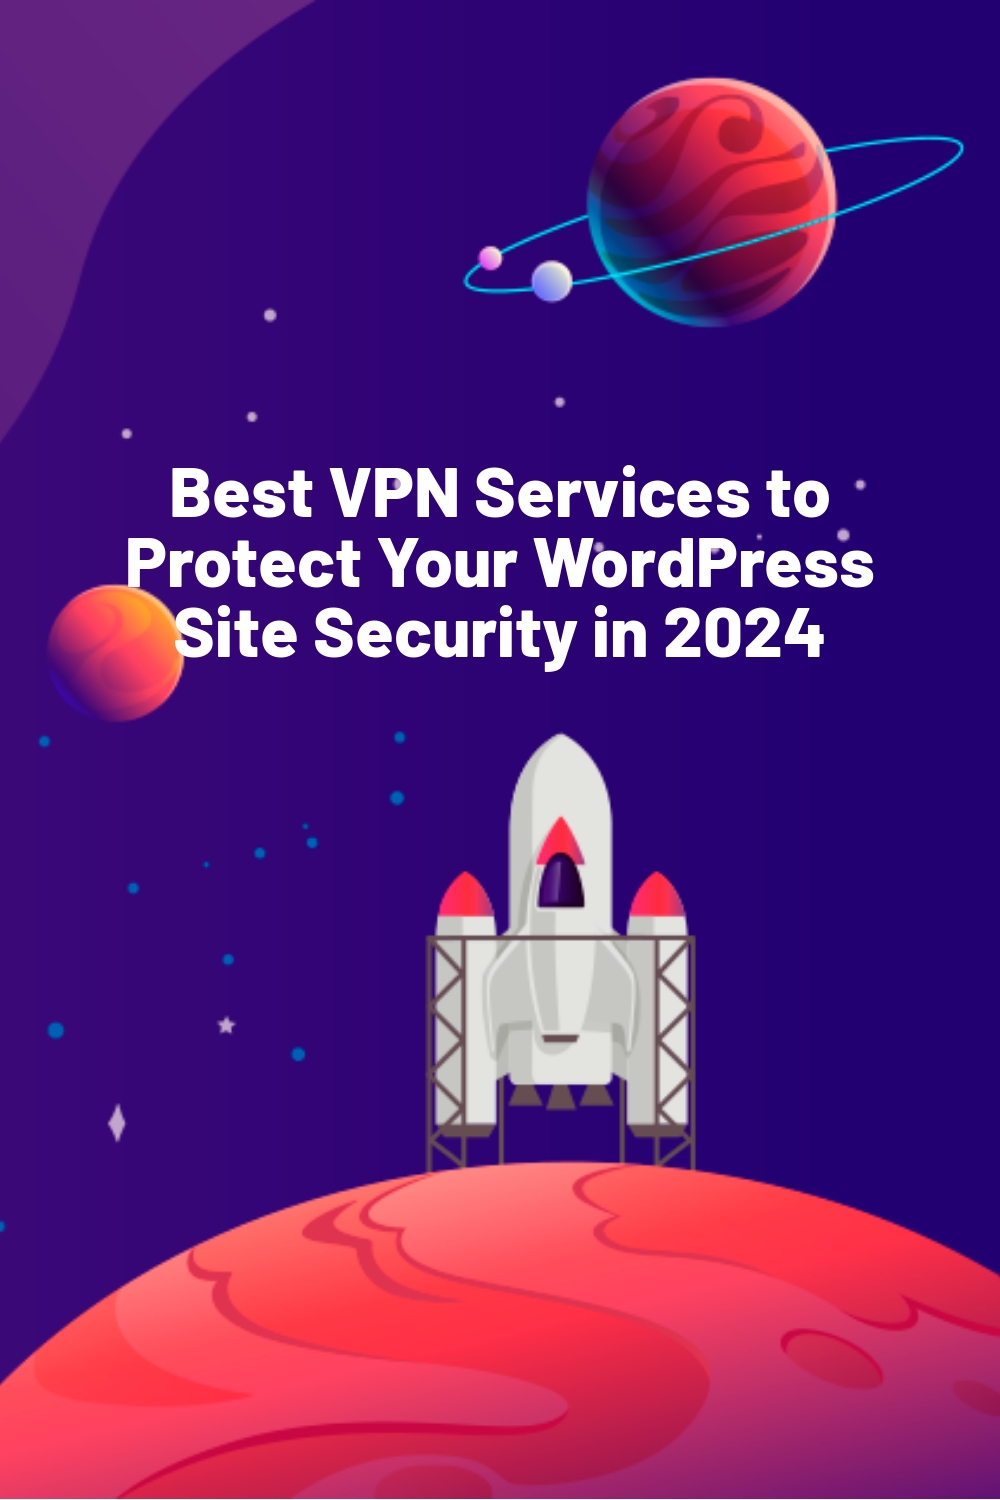 Best VPN Services to Protect Your WordPress Site Security in 2024